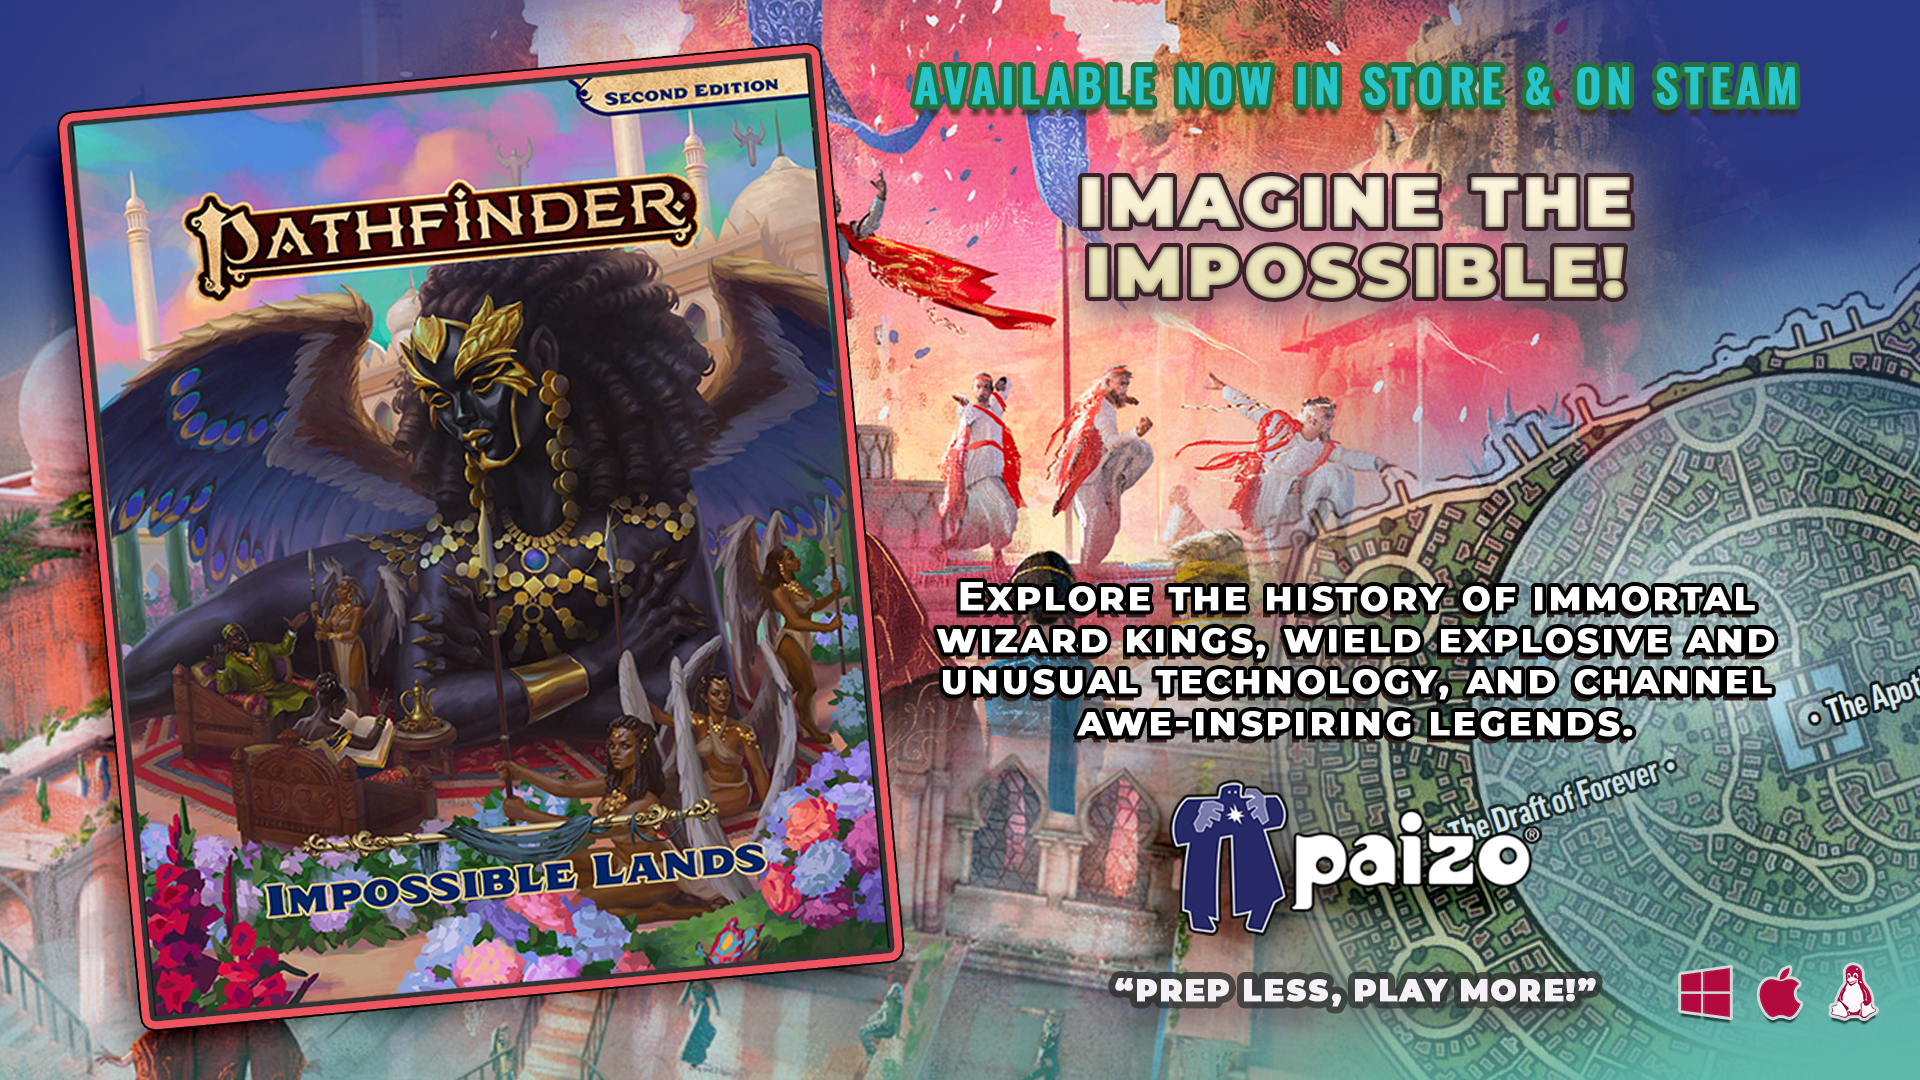 Pathfinder 2 RPG - Lost Omens Impossible Lands(PZOSMWPZO9314FG).jpg